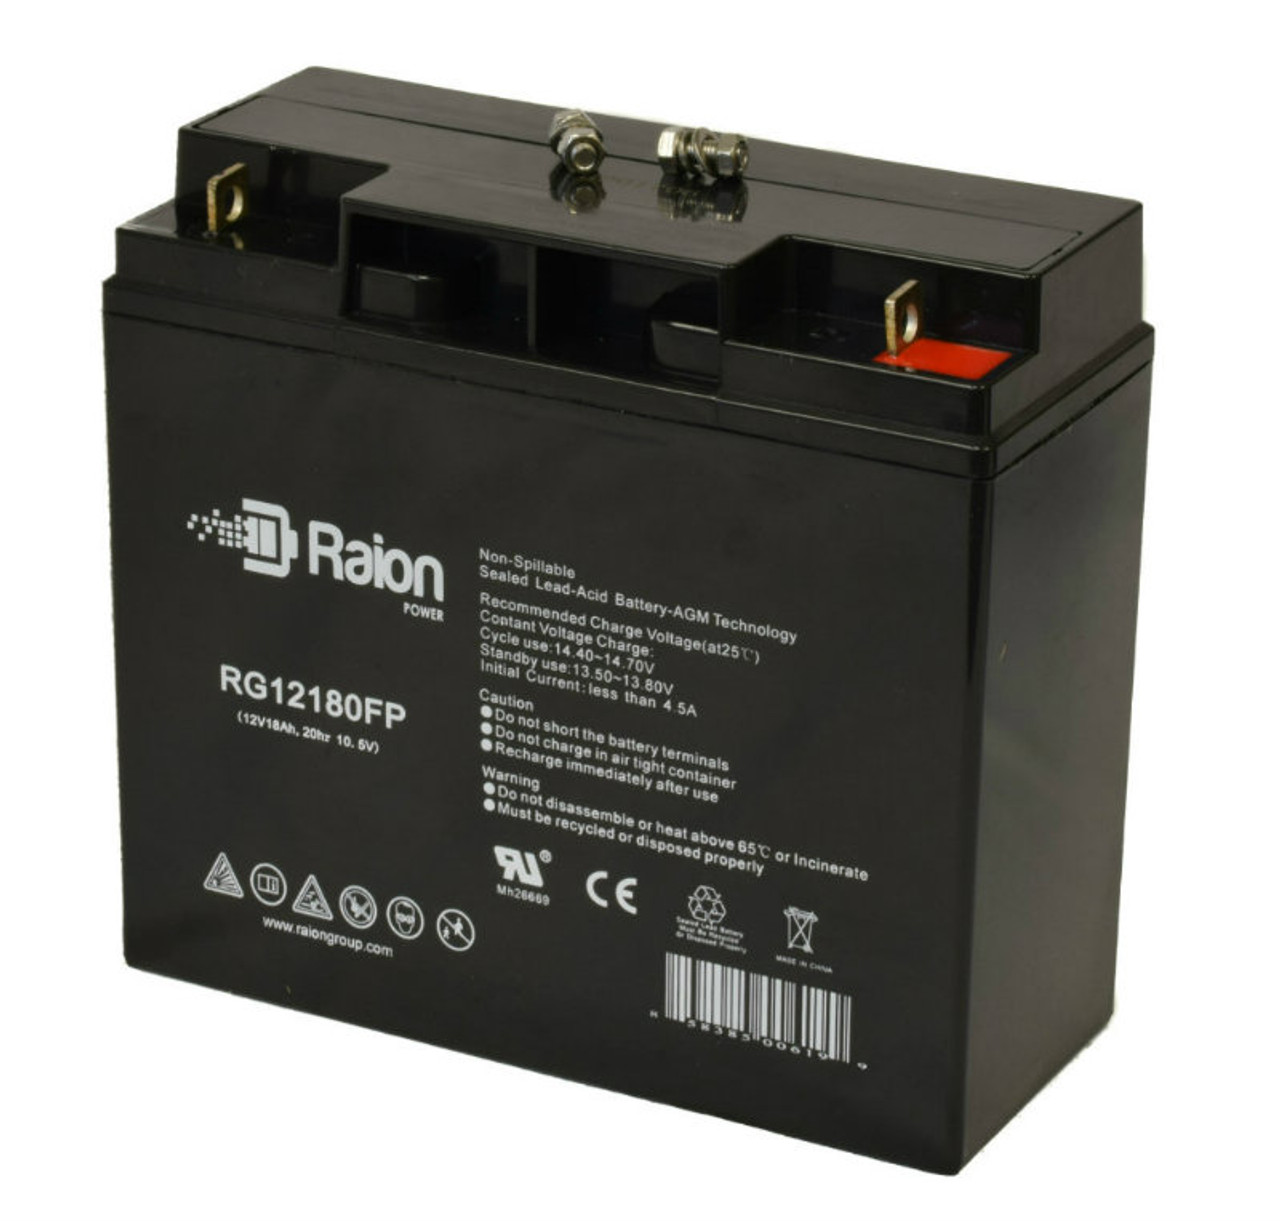 Raion Power Replacement 12V 18Ah Battery for Napel NP12180 - 1 Pack